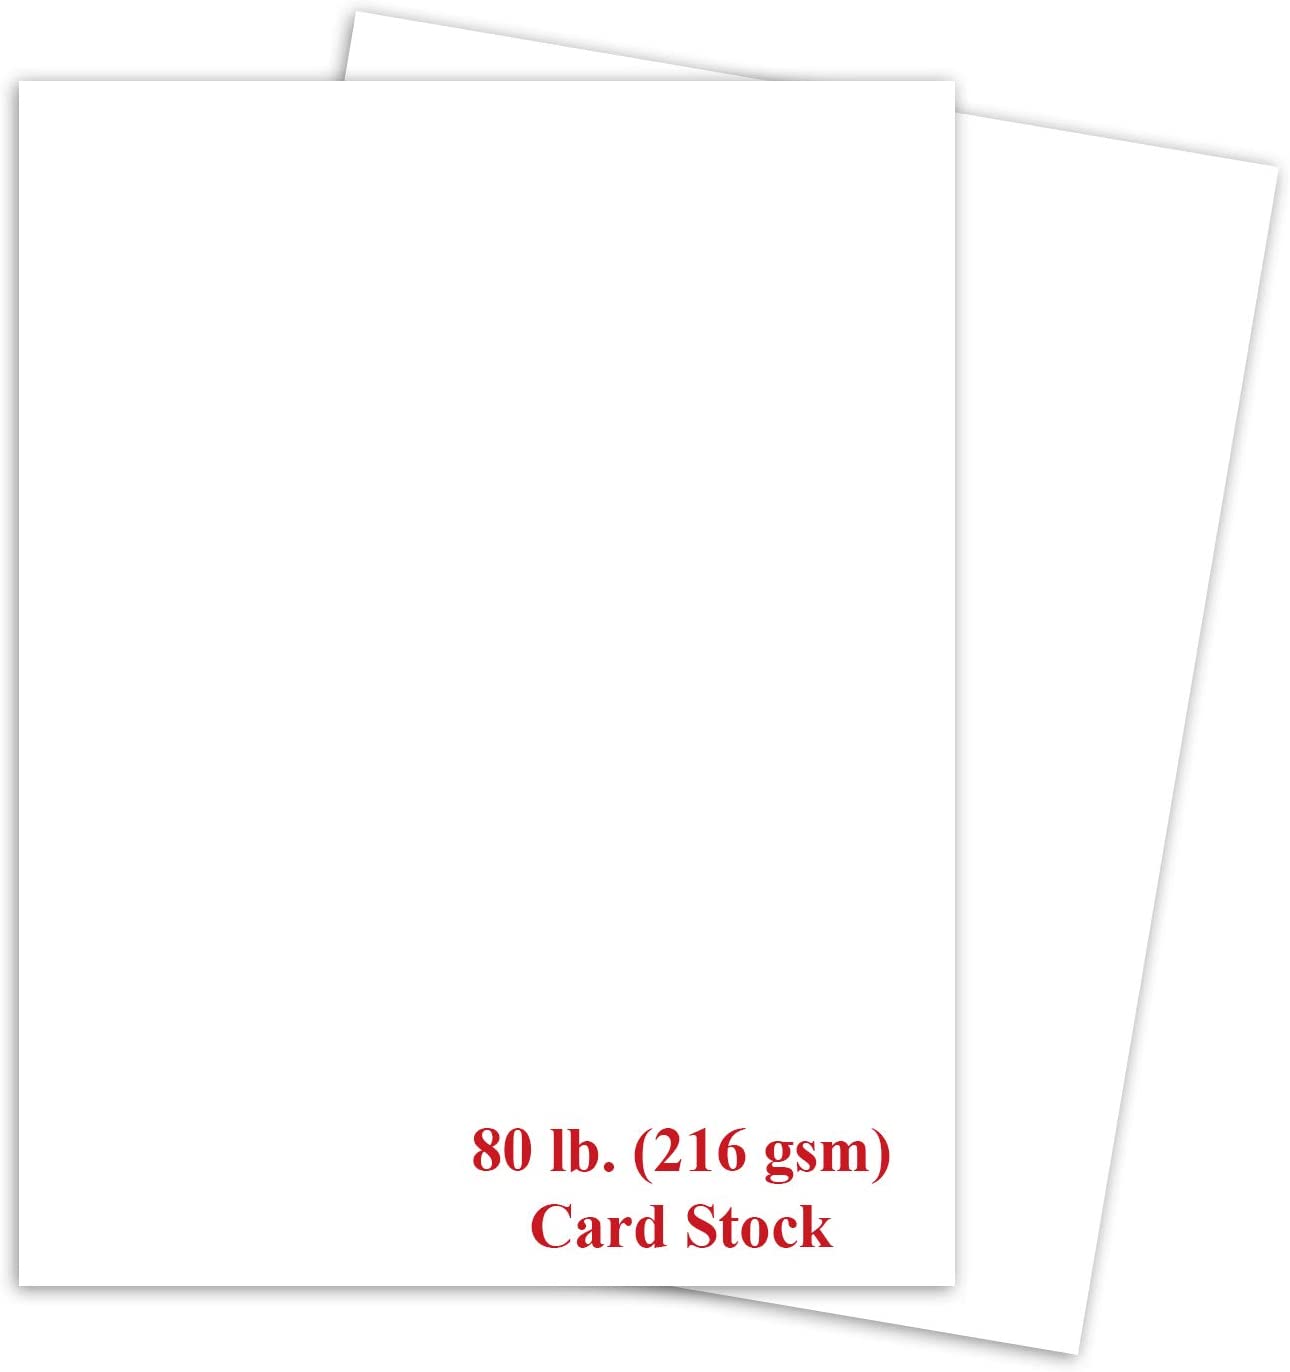 CreGear 25 Sheets White Cardstock 8.5 x 11 Cardstock Paper, Thick Cardstock  92lb/250gsm Card Stock Printer Paper, Card Stock Printer Paper for Card